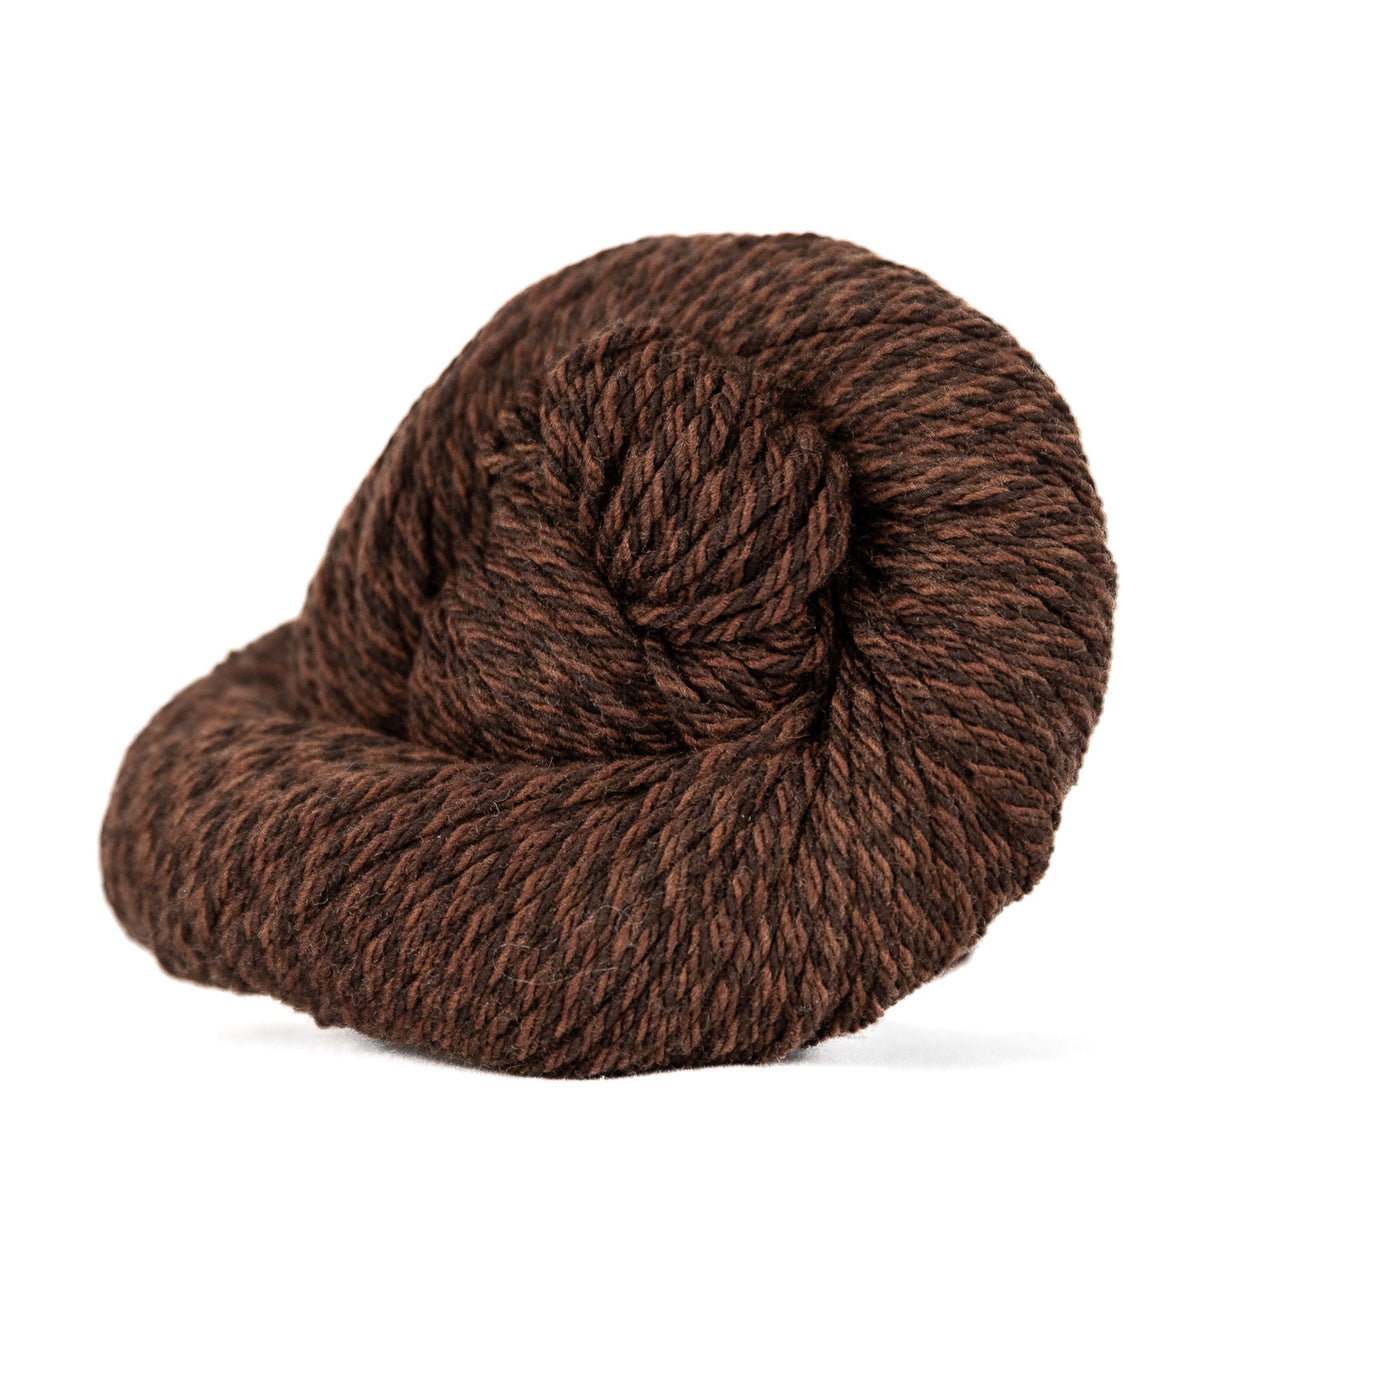 Cora 3ply Worsted Weight Yarn - Marled Chestnut